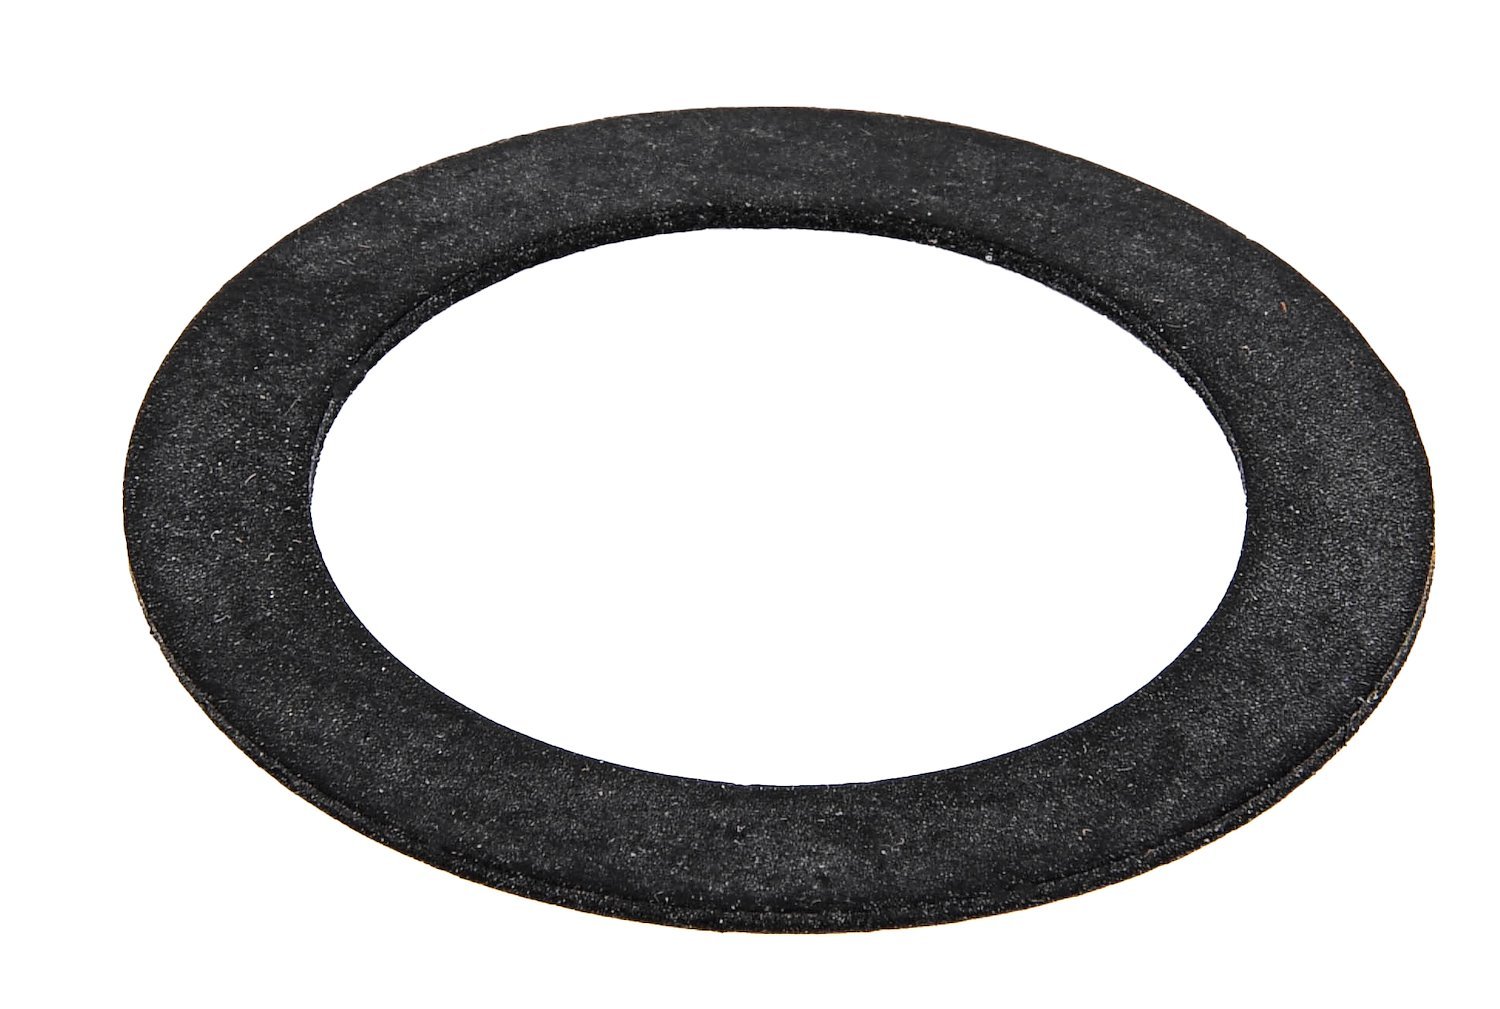 Replacement Fuel Filter Gasket  for JEGS  555-150070, 150080, 150071, 150081, 150072,150082, 150073 & 150083